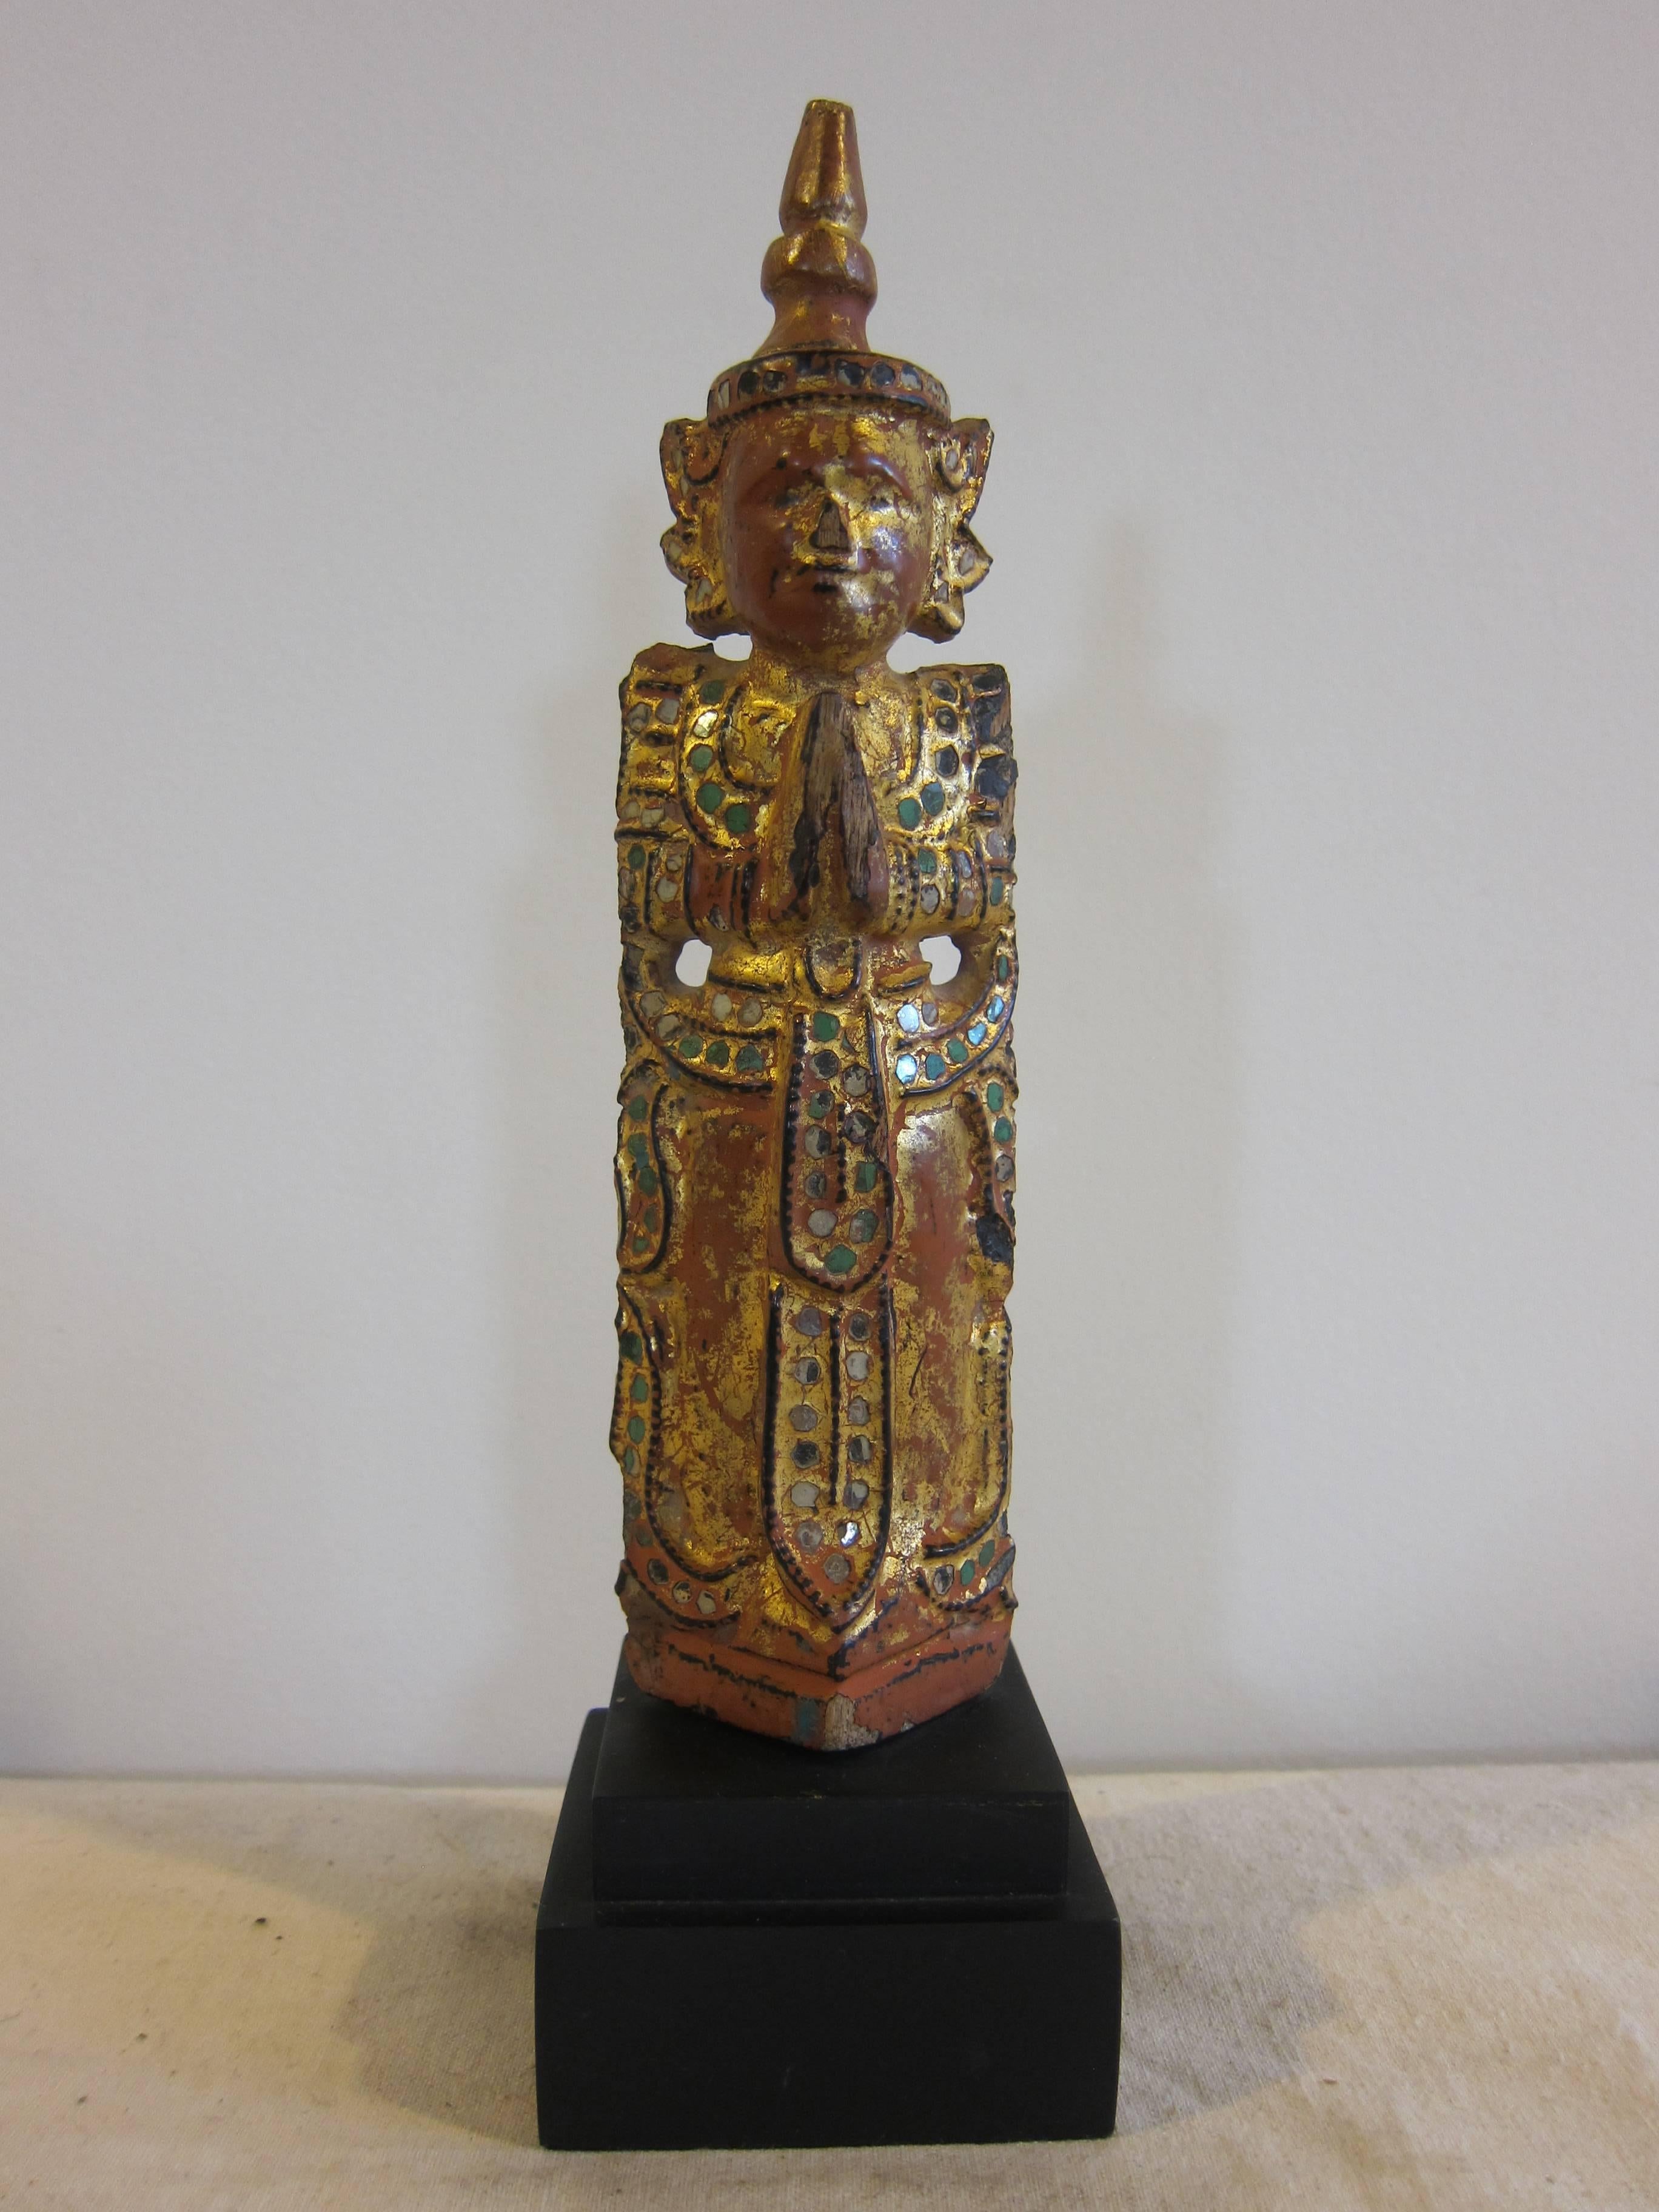 A 19th century Burmese / Thai Theravada Buddhist prayer angel carved teak wood with dry lacquer, Thayo with jewel glass and gilding. In the welcoming position with hands together at chest pointed up. This is also considered a prayer stance. This